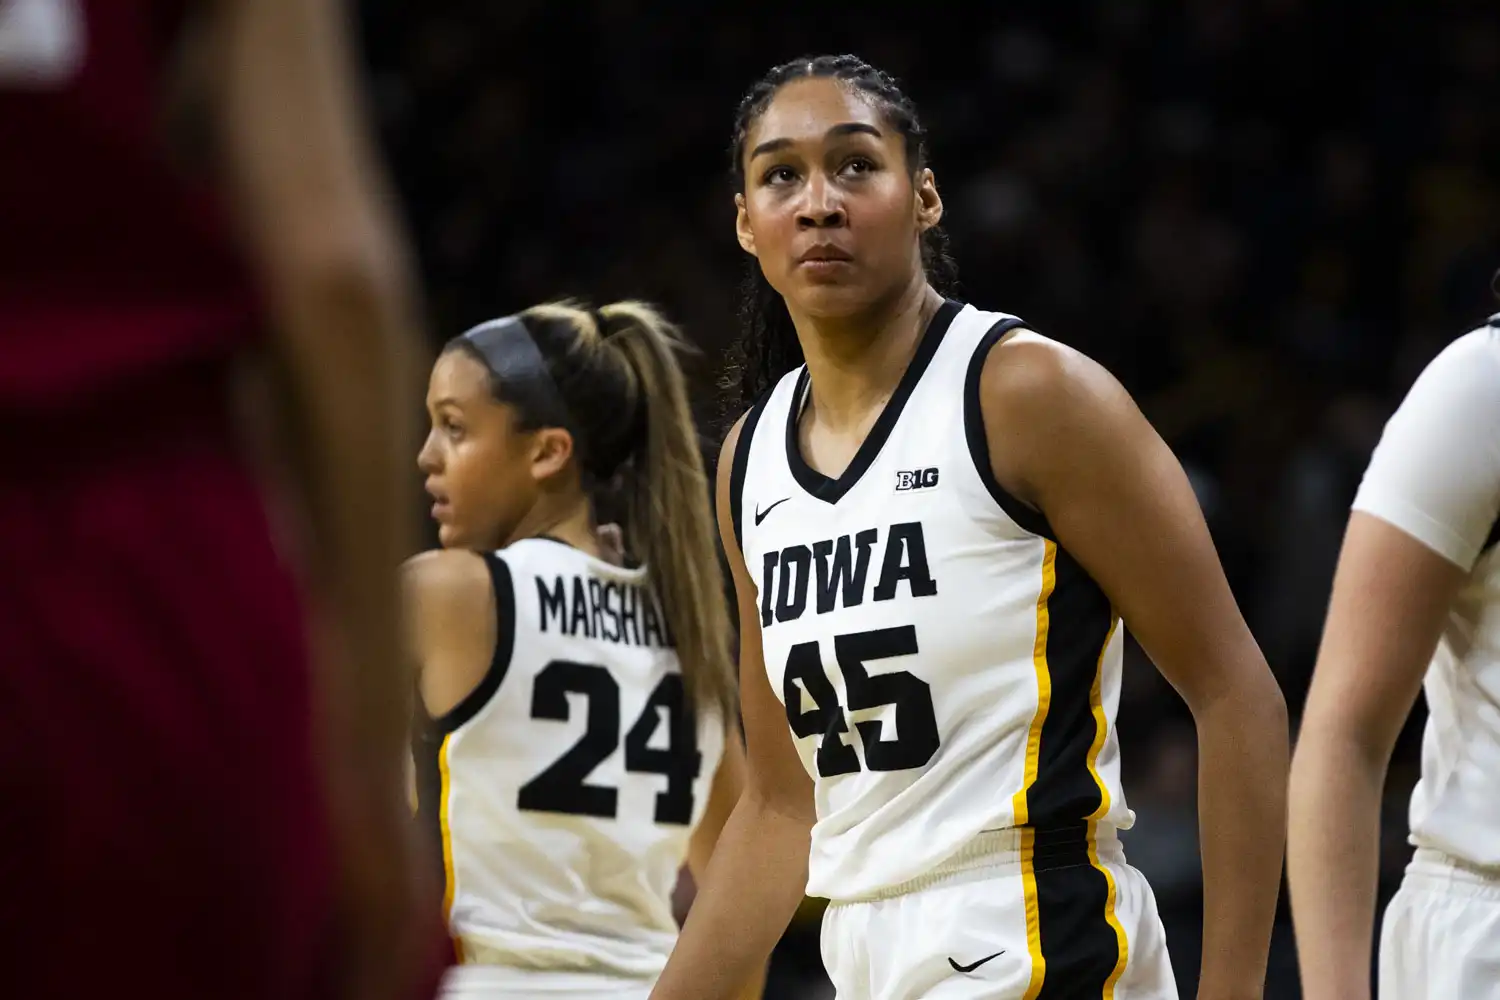 Hannah Stuelke shines with 47 points in No. 2 Iowa women's basketball 111-93 win against Penn State